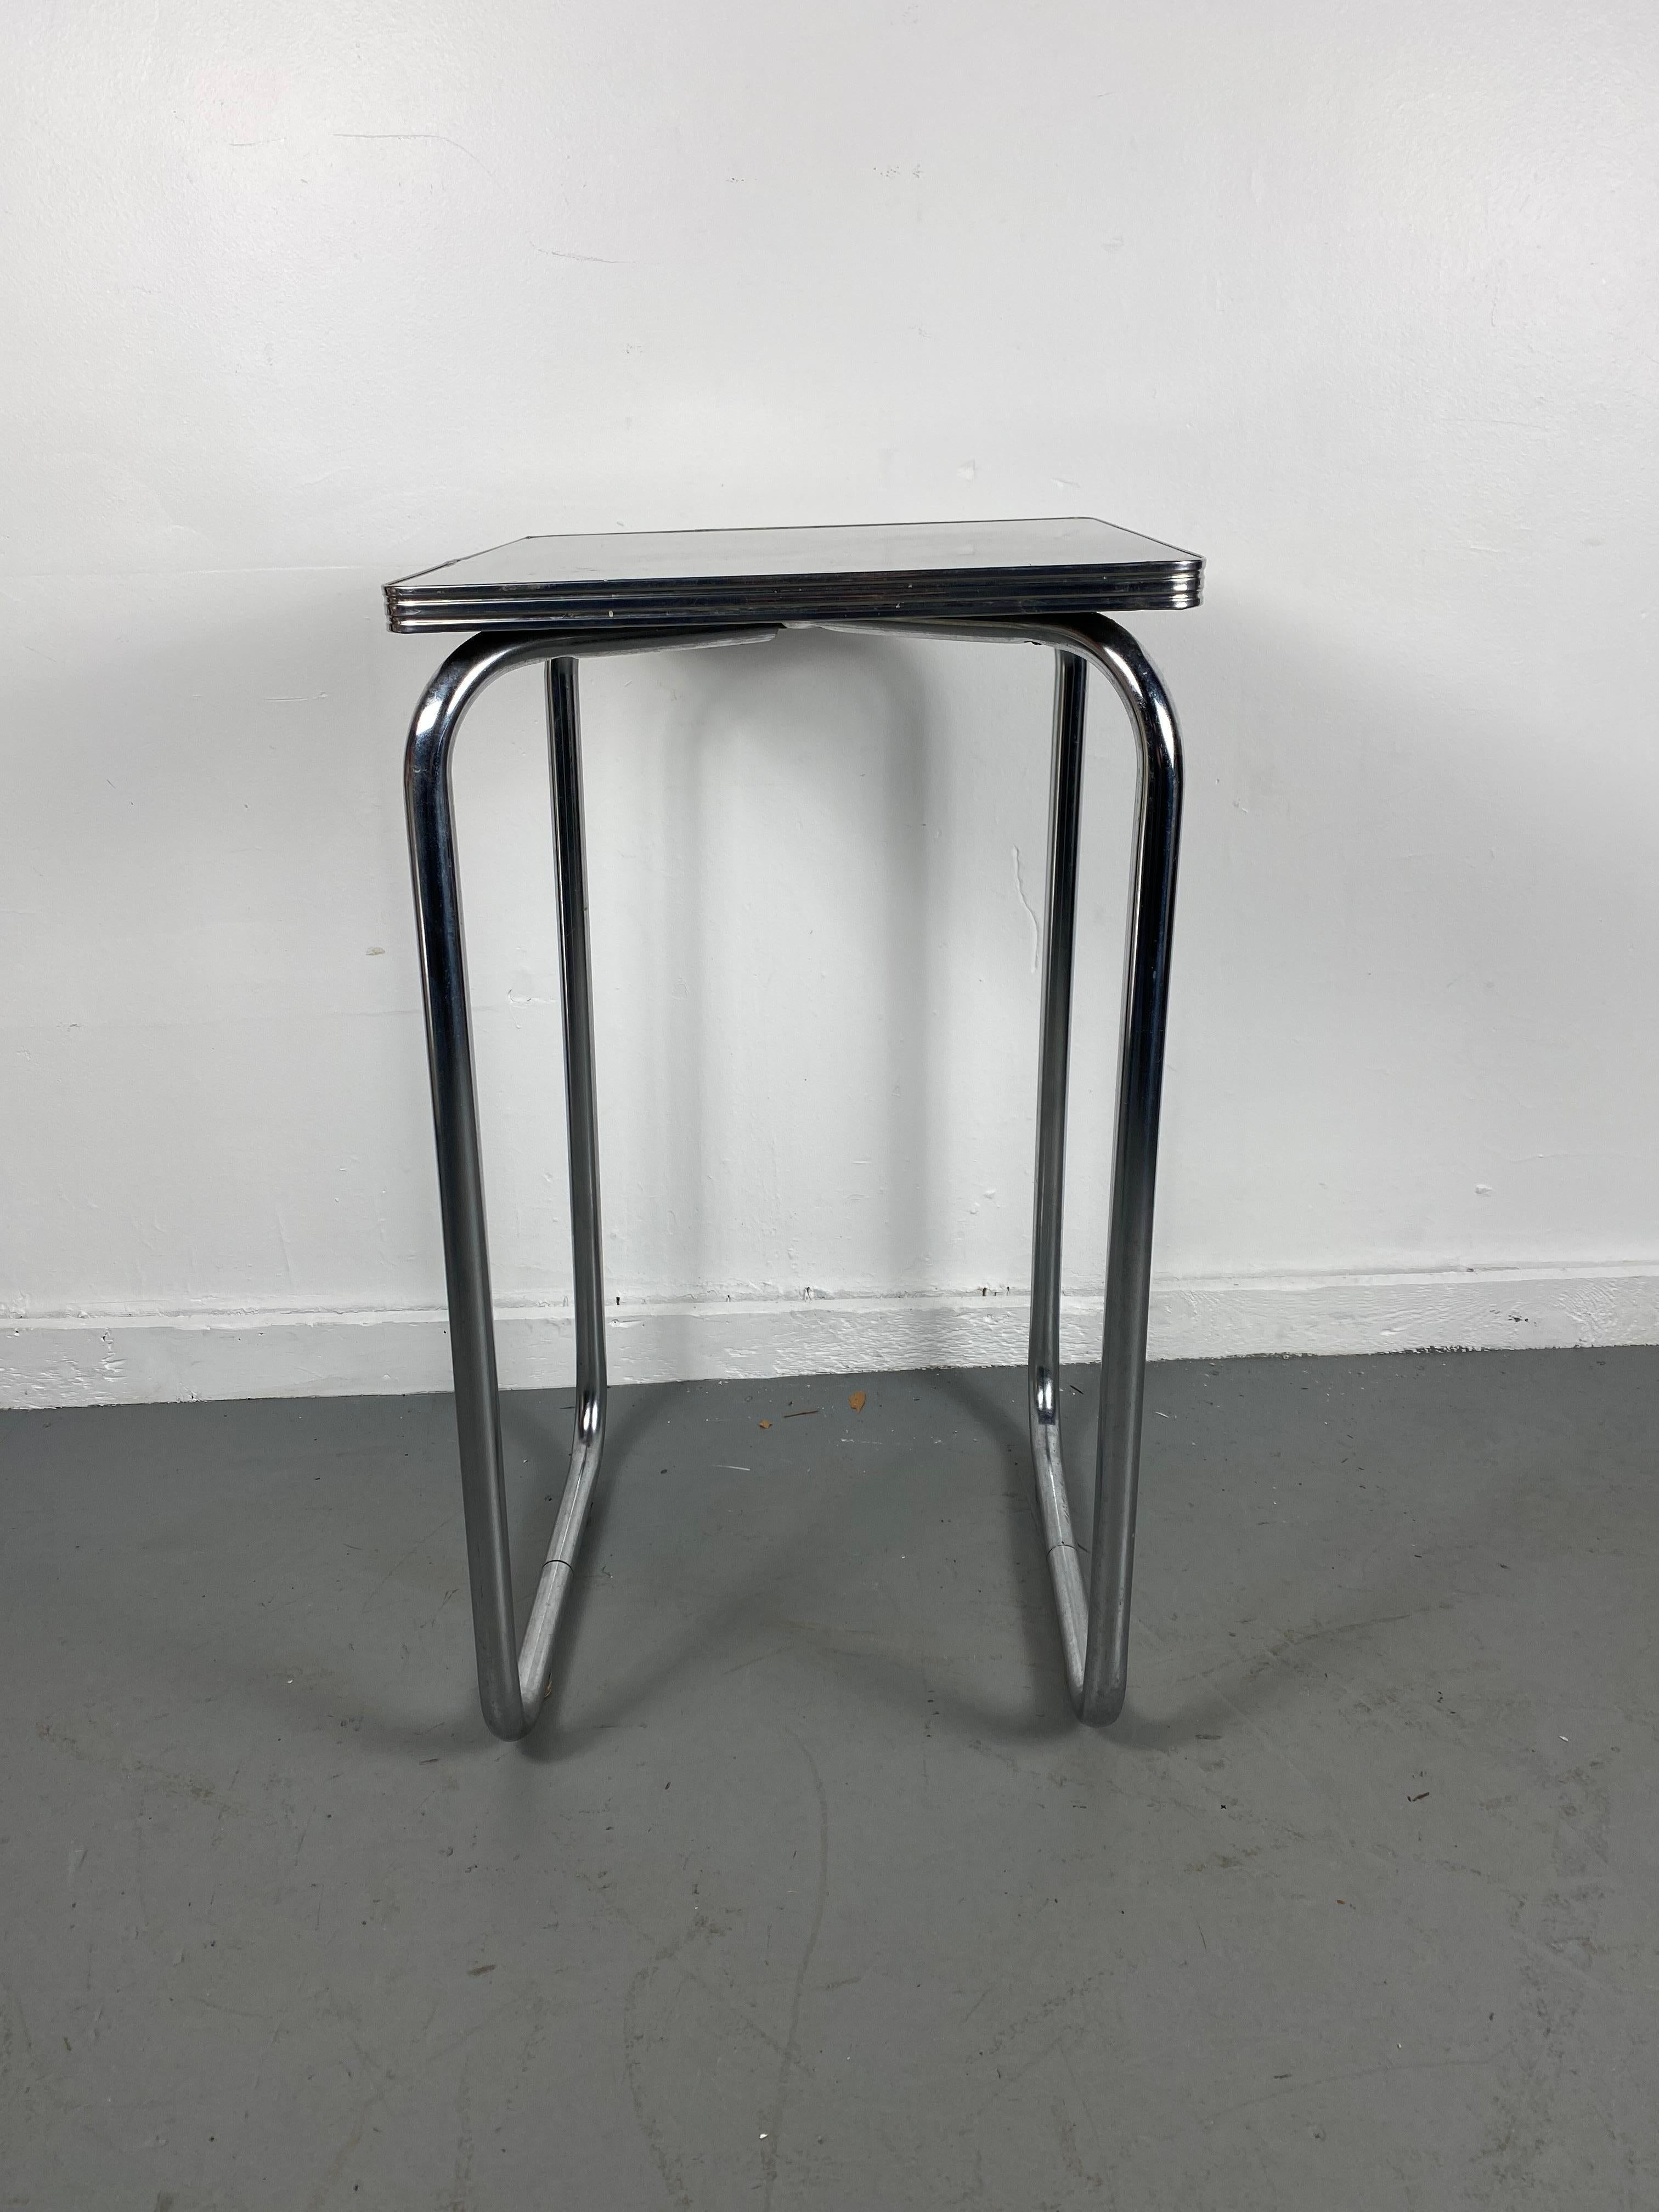 Unusual Bauhaus style black and tubular chrome table / stand / attributed to Wolfgang Hoffmann for Howell Furniture Company. Great size and proportion. Handsome under-stated design. Reminiscent of classic designs by Marcel Breuer, Mies Van der rohe.